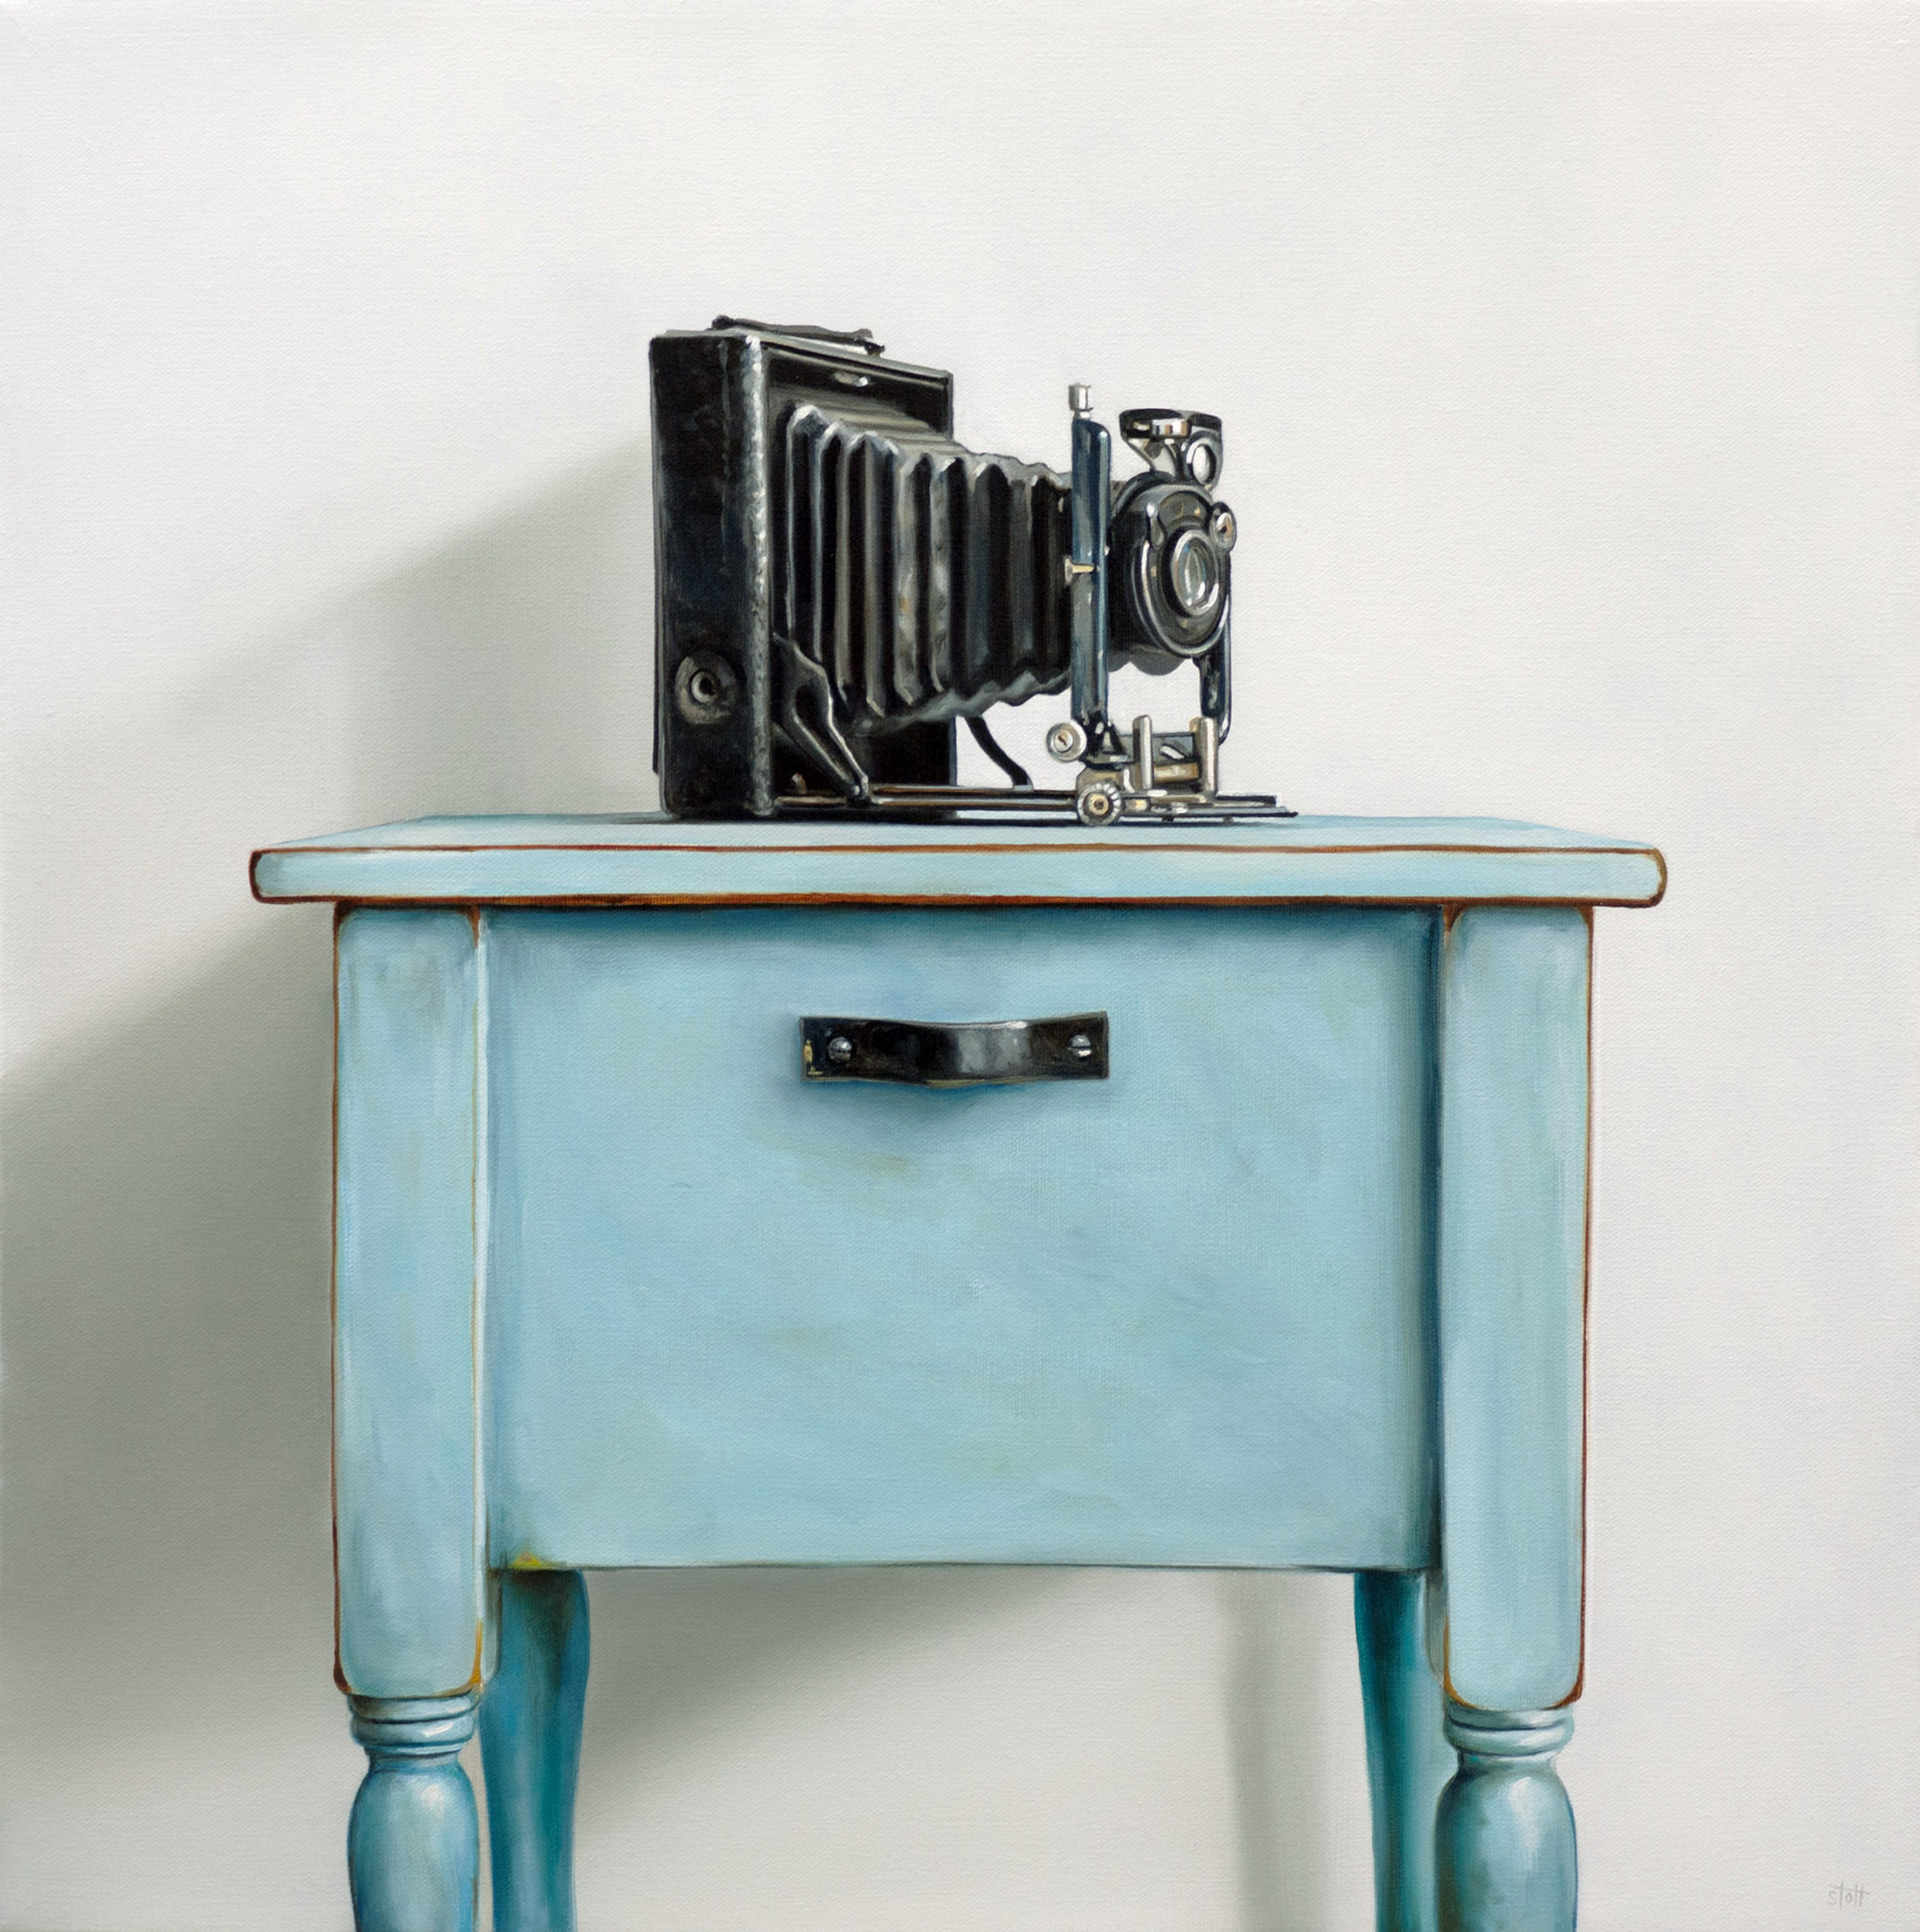 Antique Camera & Blue Table by Christopher Stott